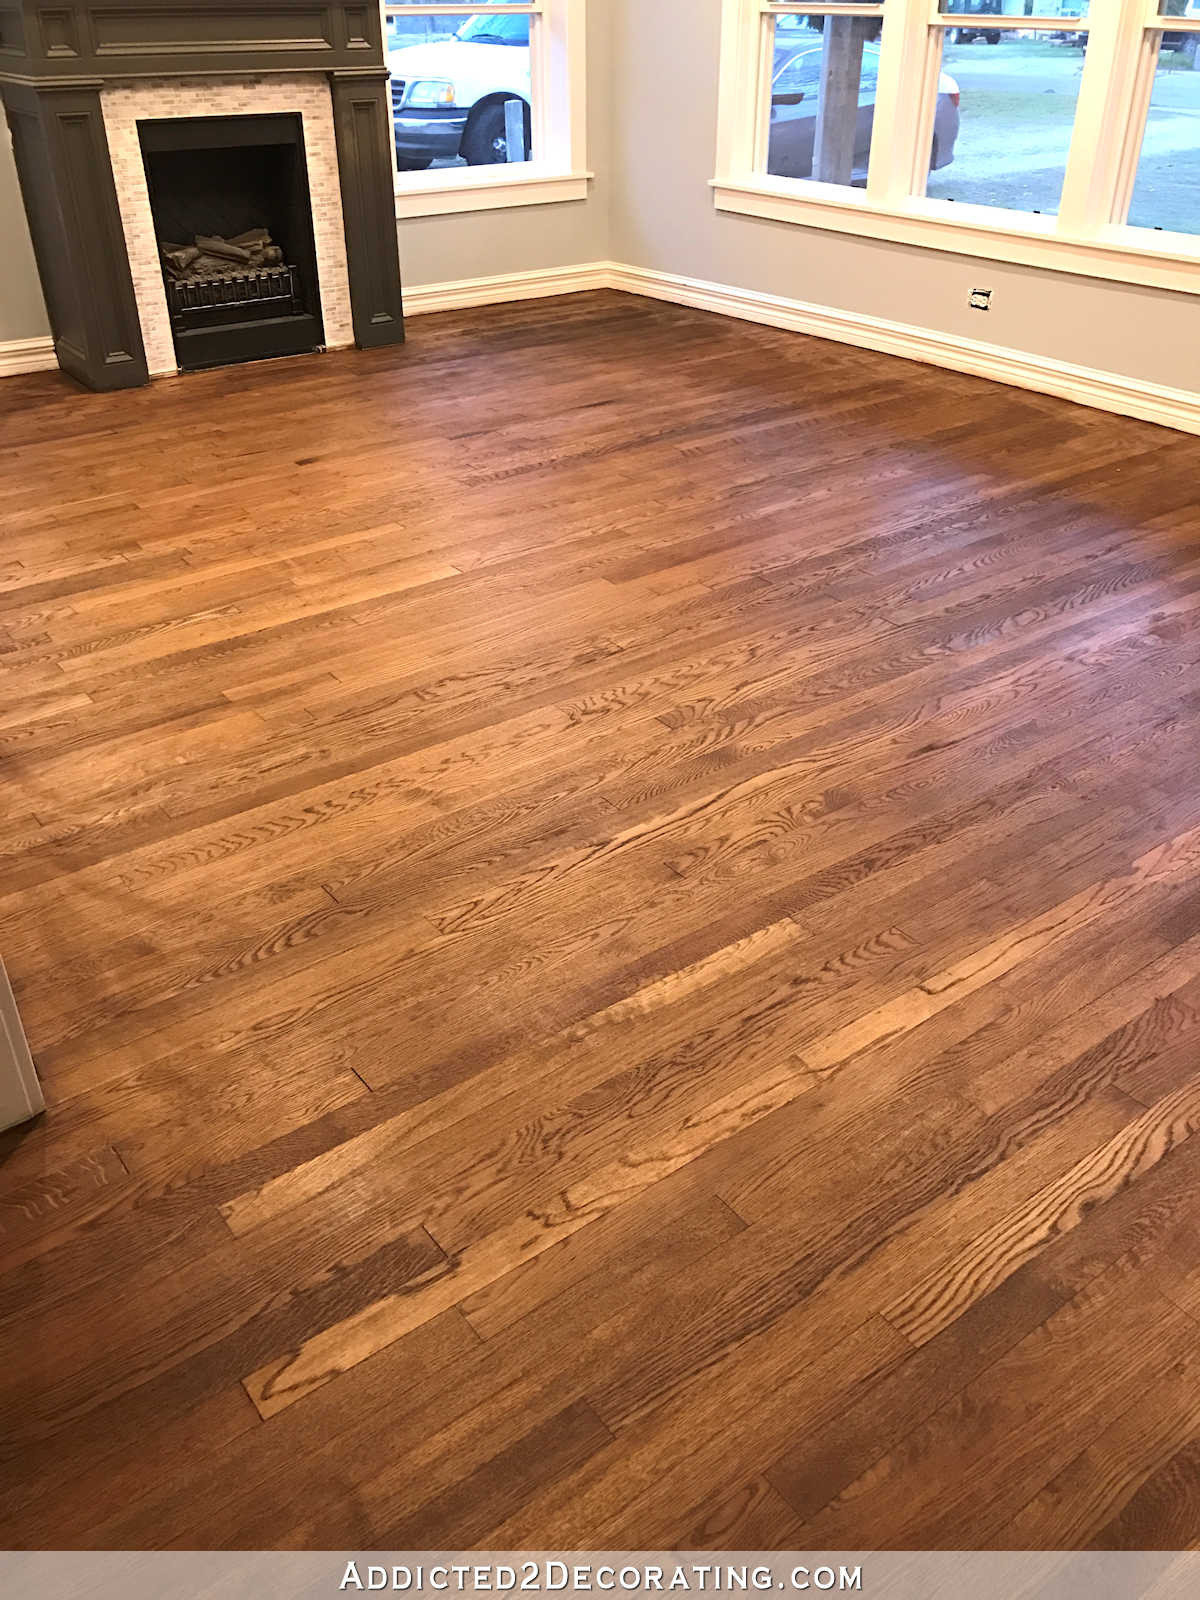 25 attractive top Hardwood Floor Colors 2017 2023 free download top hardwood floor colors 2017 of adventures in staining my red oak hardwood floors products process with regard to staining red oak hardwood floors 8a living room and entryway